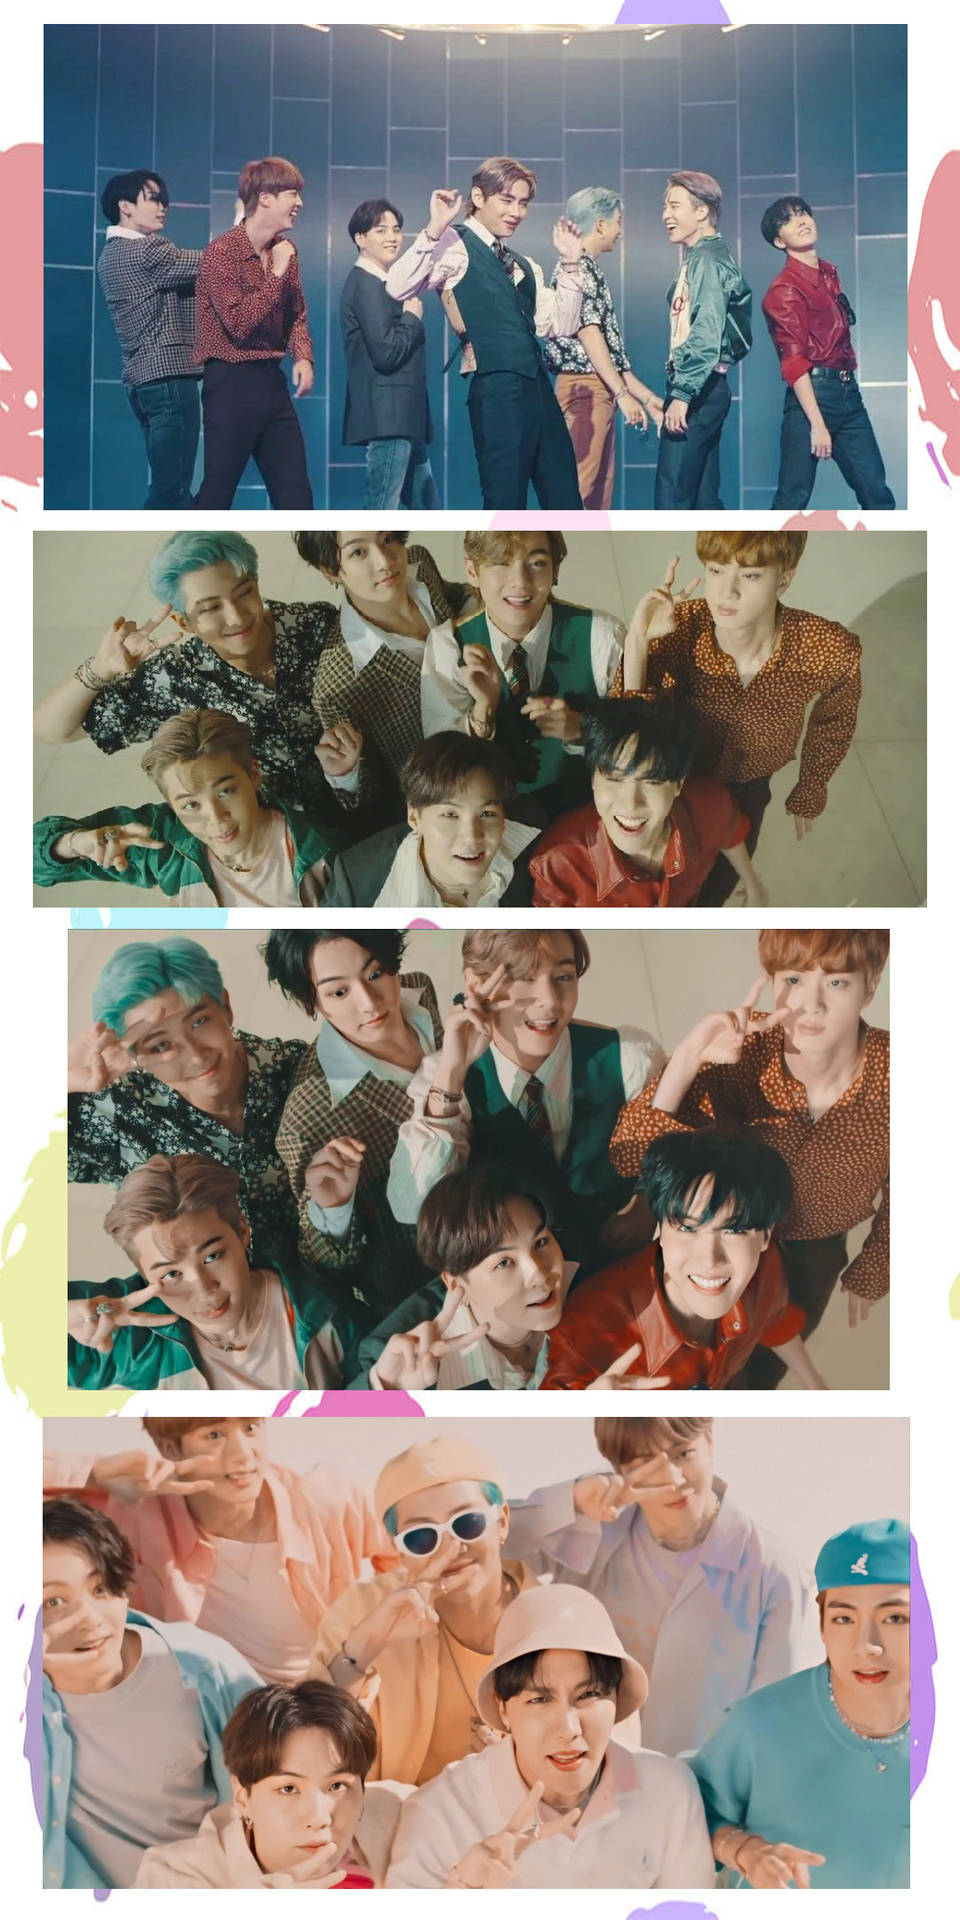 Bts Dynamite Group Photo Collage Wallpaper